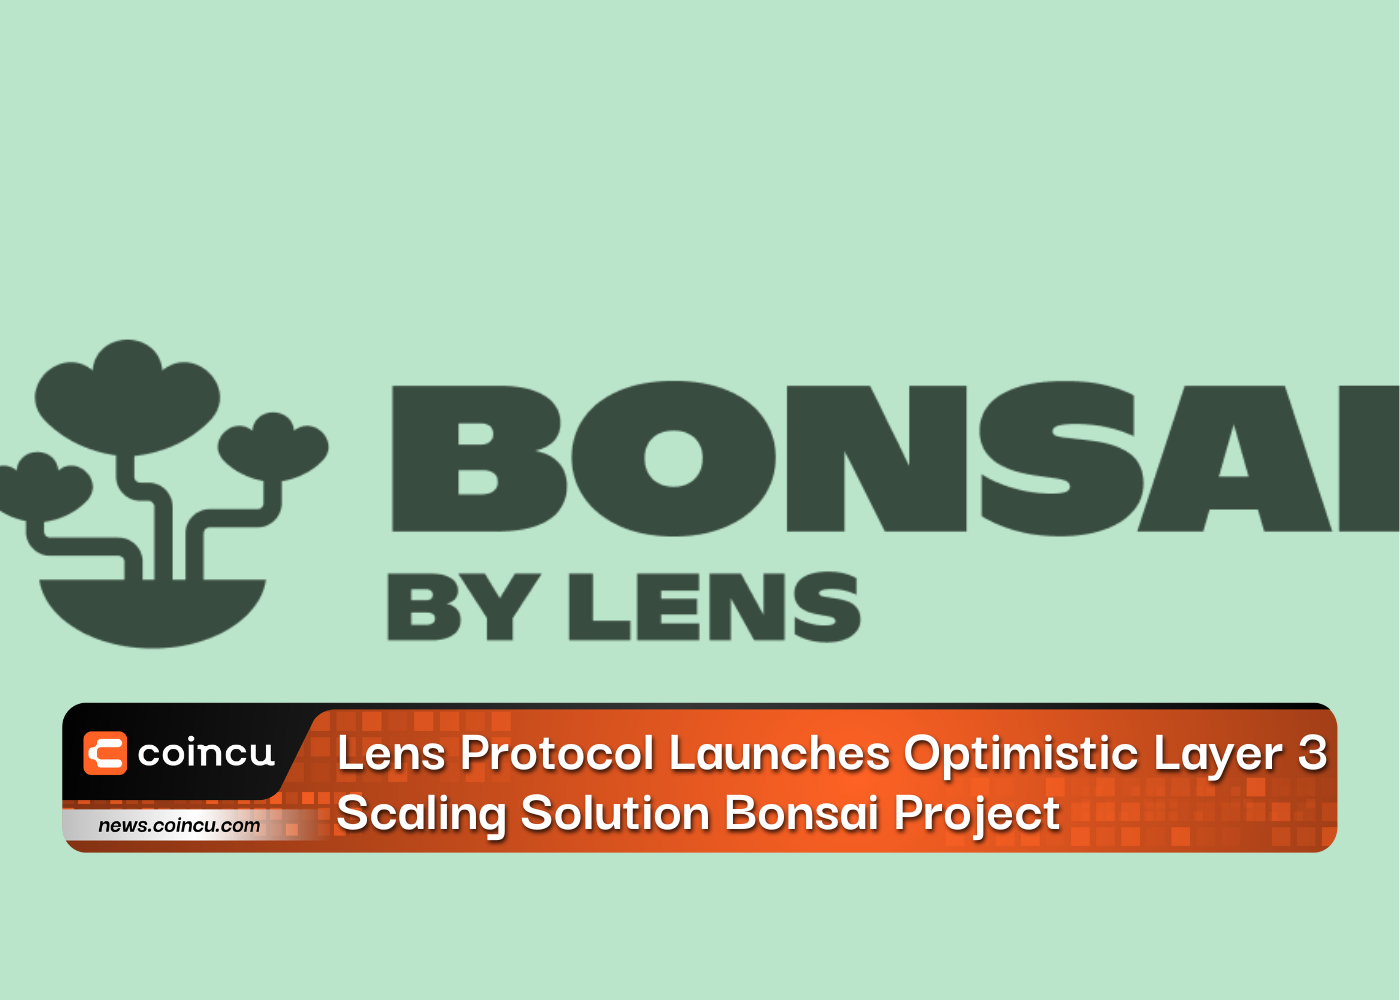 Lens Protocol Launches Optimistic Layer 3 Scaling Solution Bonsai Project